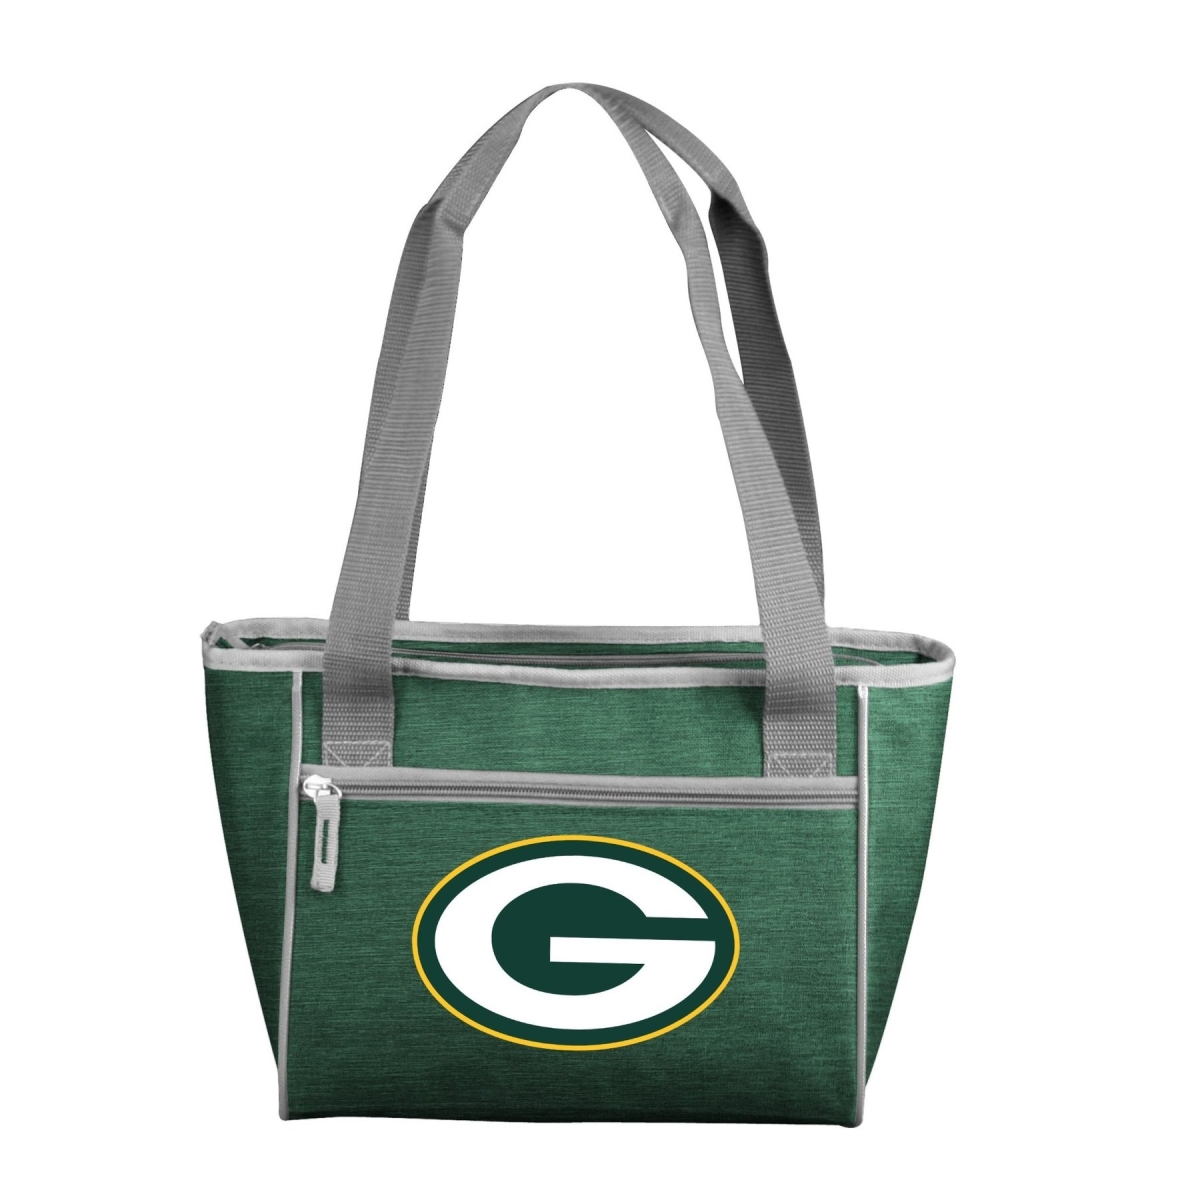 Picture of Logo Chair 612-83-CR1 NFL Green Bay Packers Crosshatch Cooler Tote Bag Holds for 16 Cans